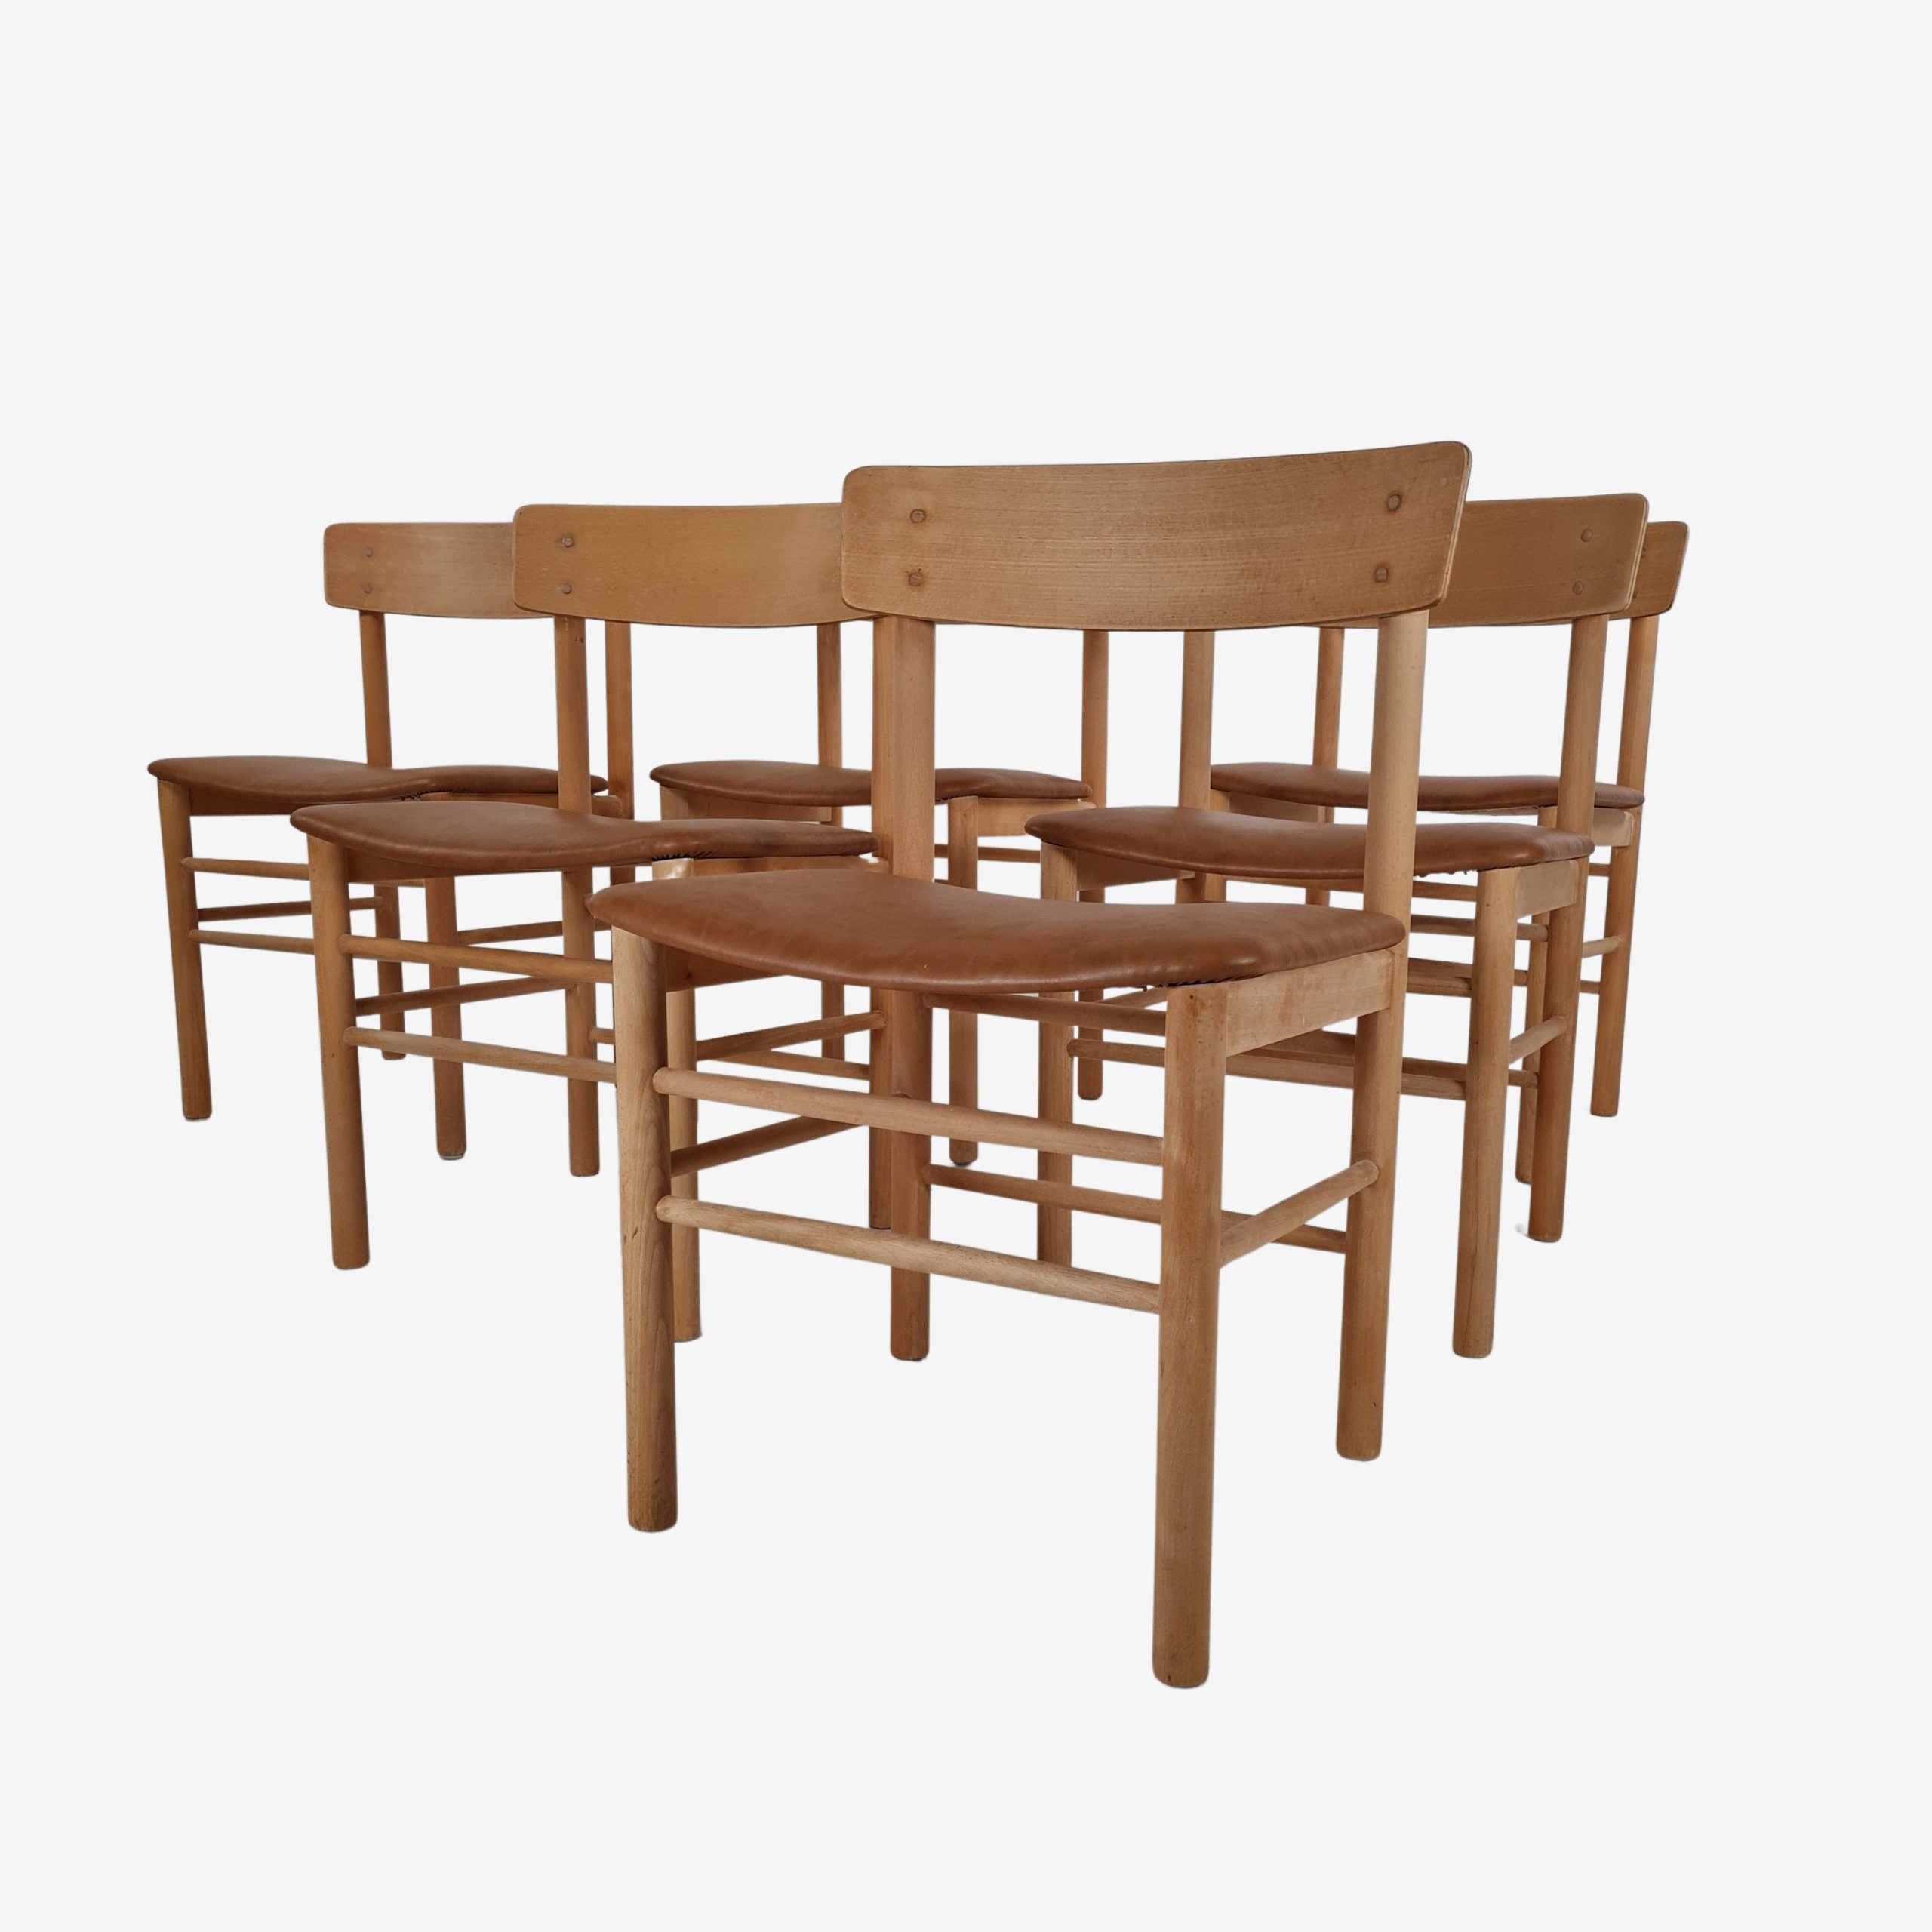 Dining table chair model 211 | Th: Harlang | Farstrup | Newly upholstered with artificial leather